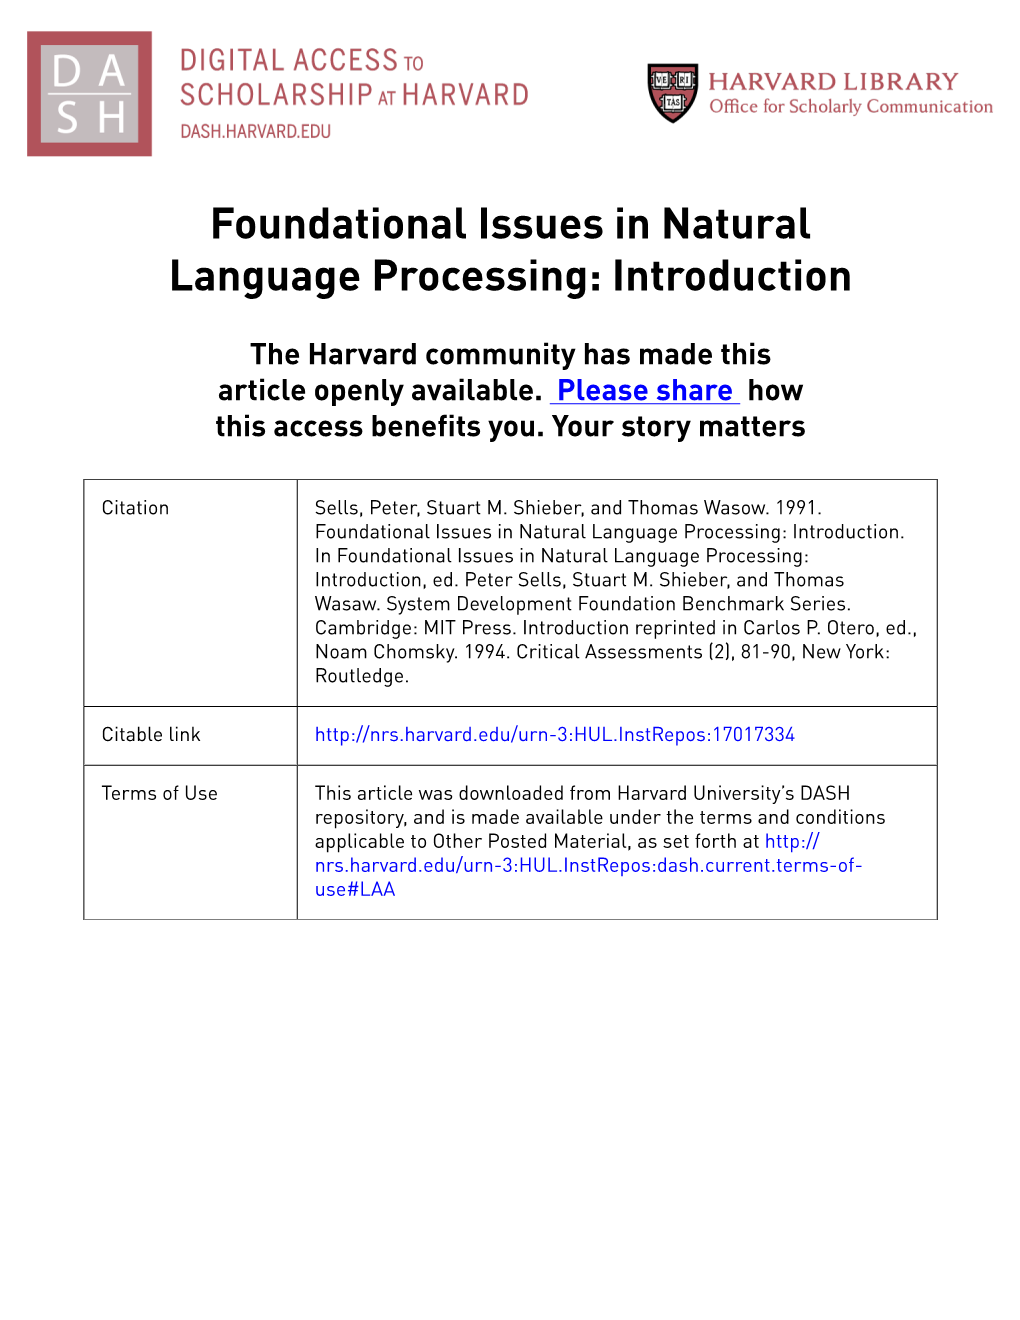 Foundational Issues in Natural Language Processing: Introduction